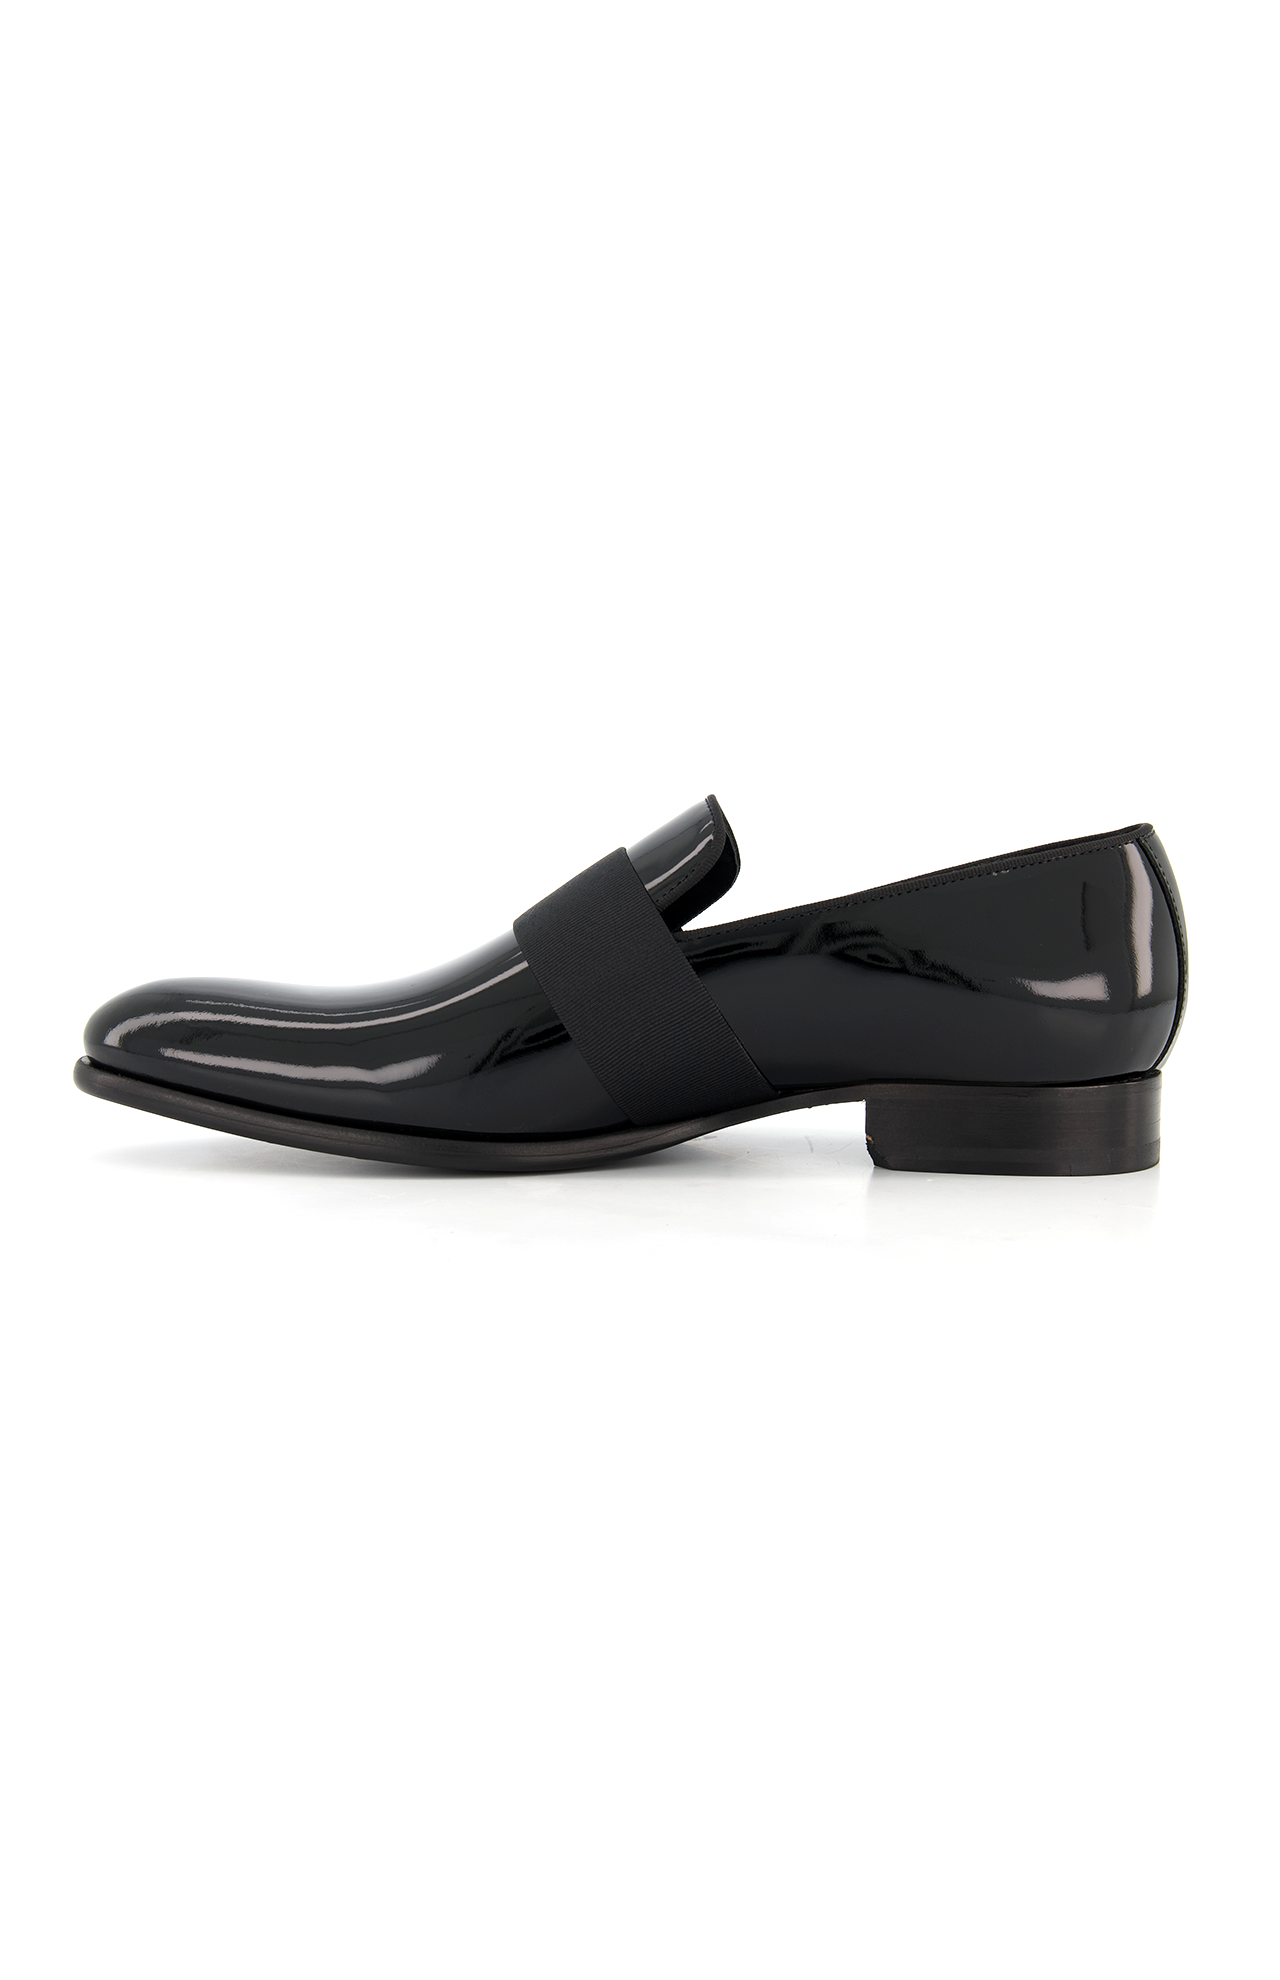 To Boot Perry Formal Slip Black Left Side Profile Image (6834516099187)